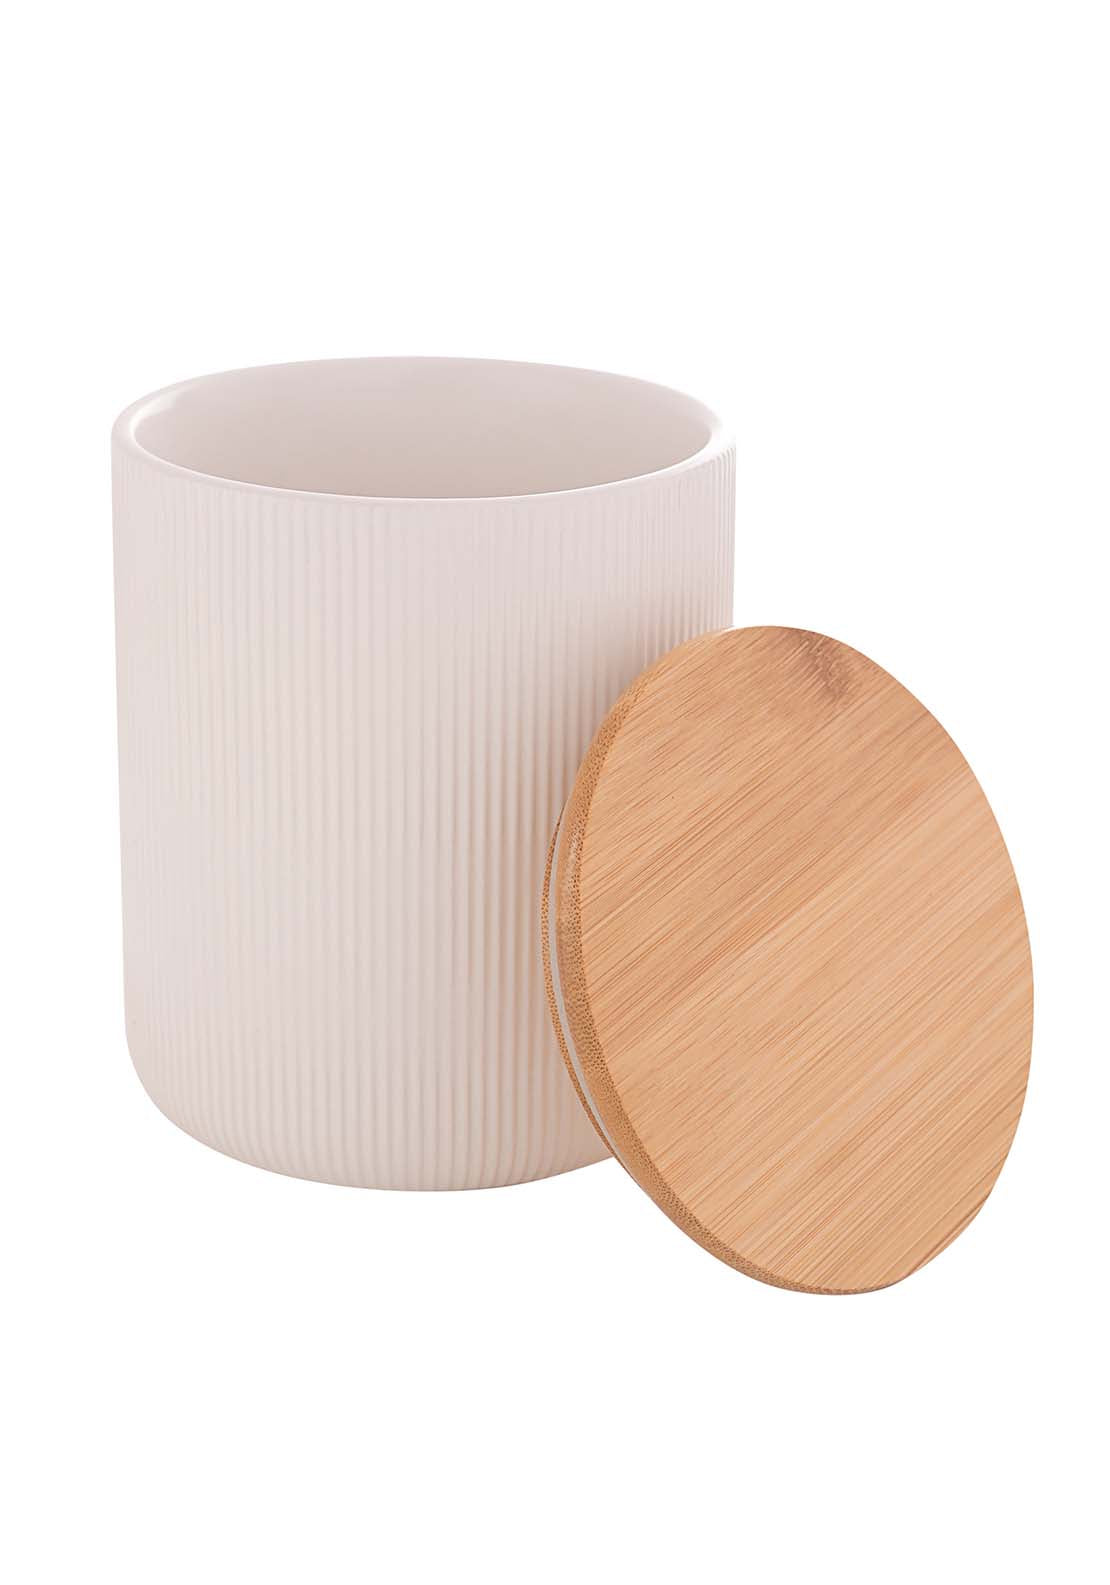 The Home Collection Ribbed Canister With Bamboo - White 2 Shaws Department Stores